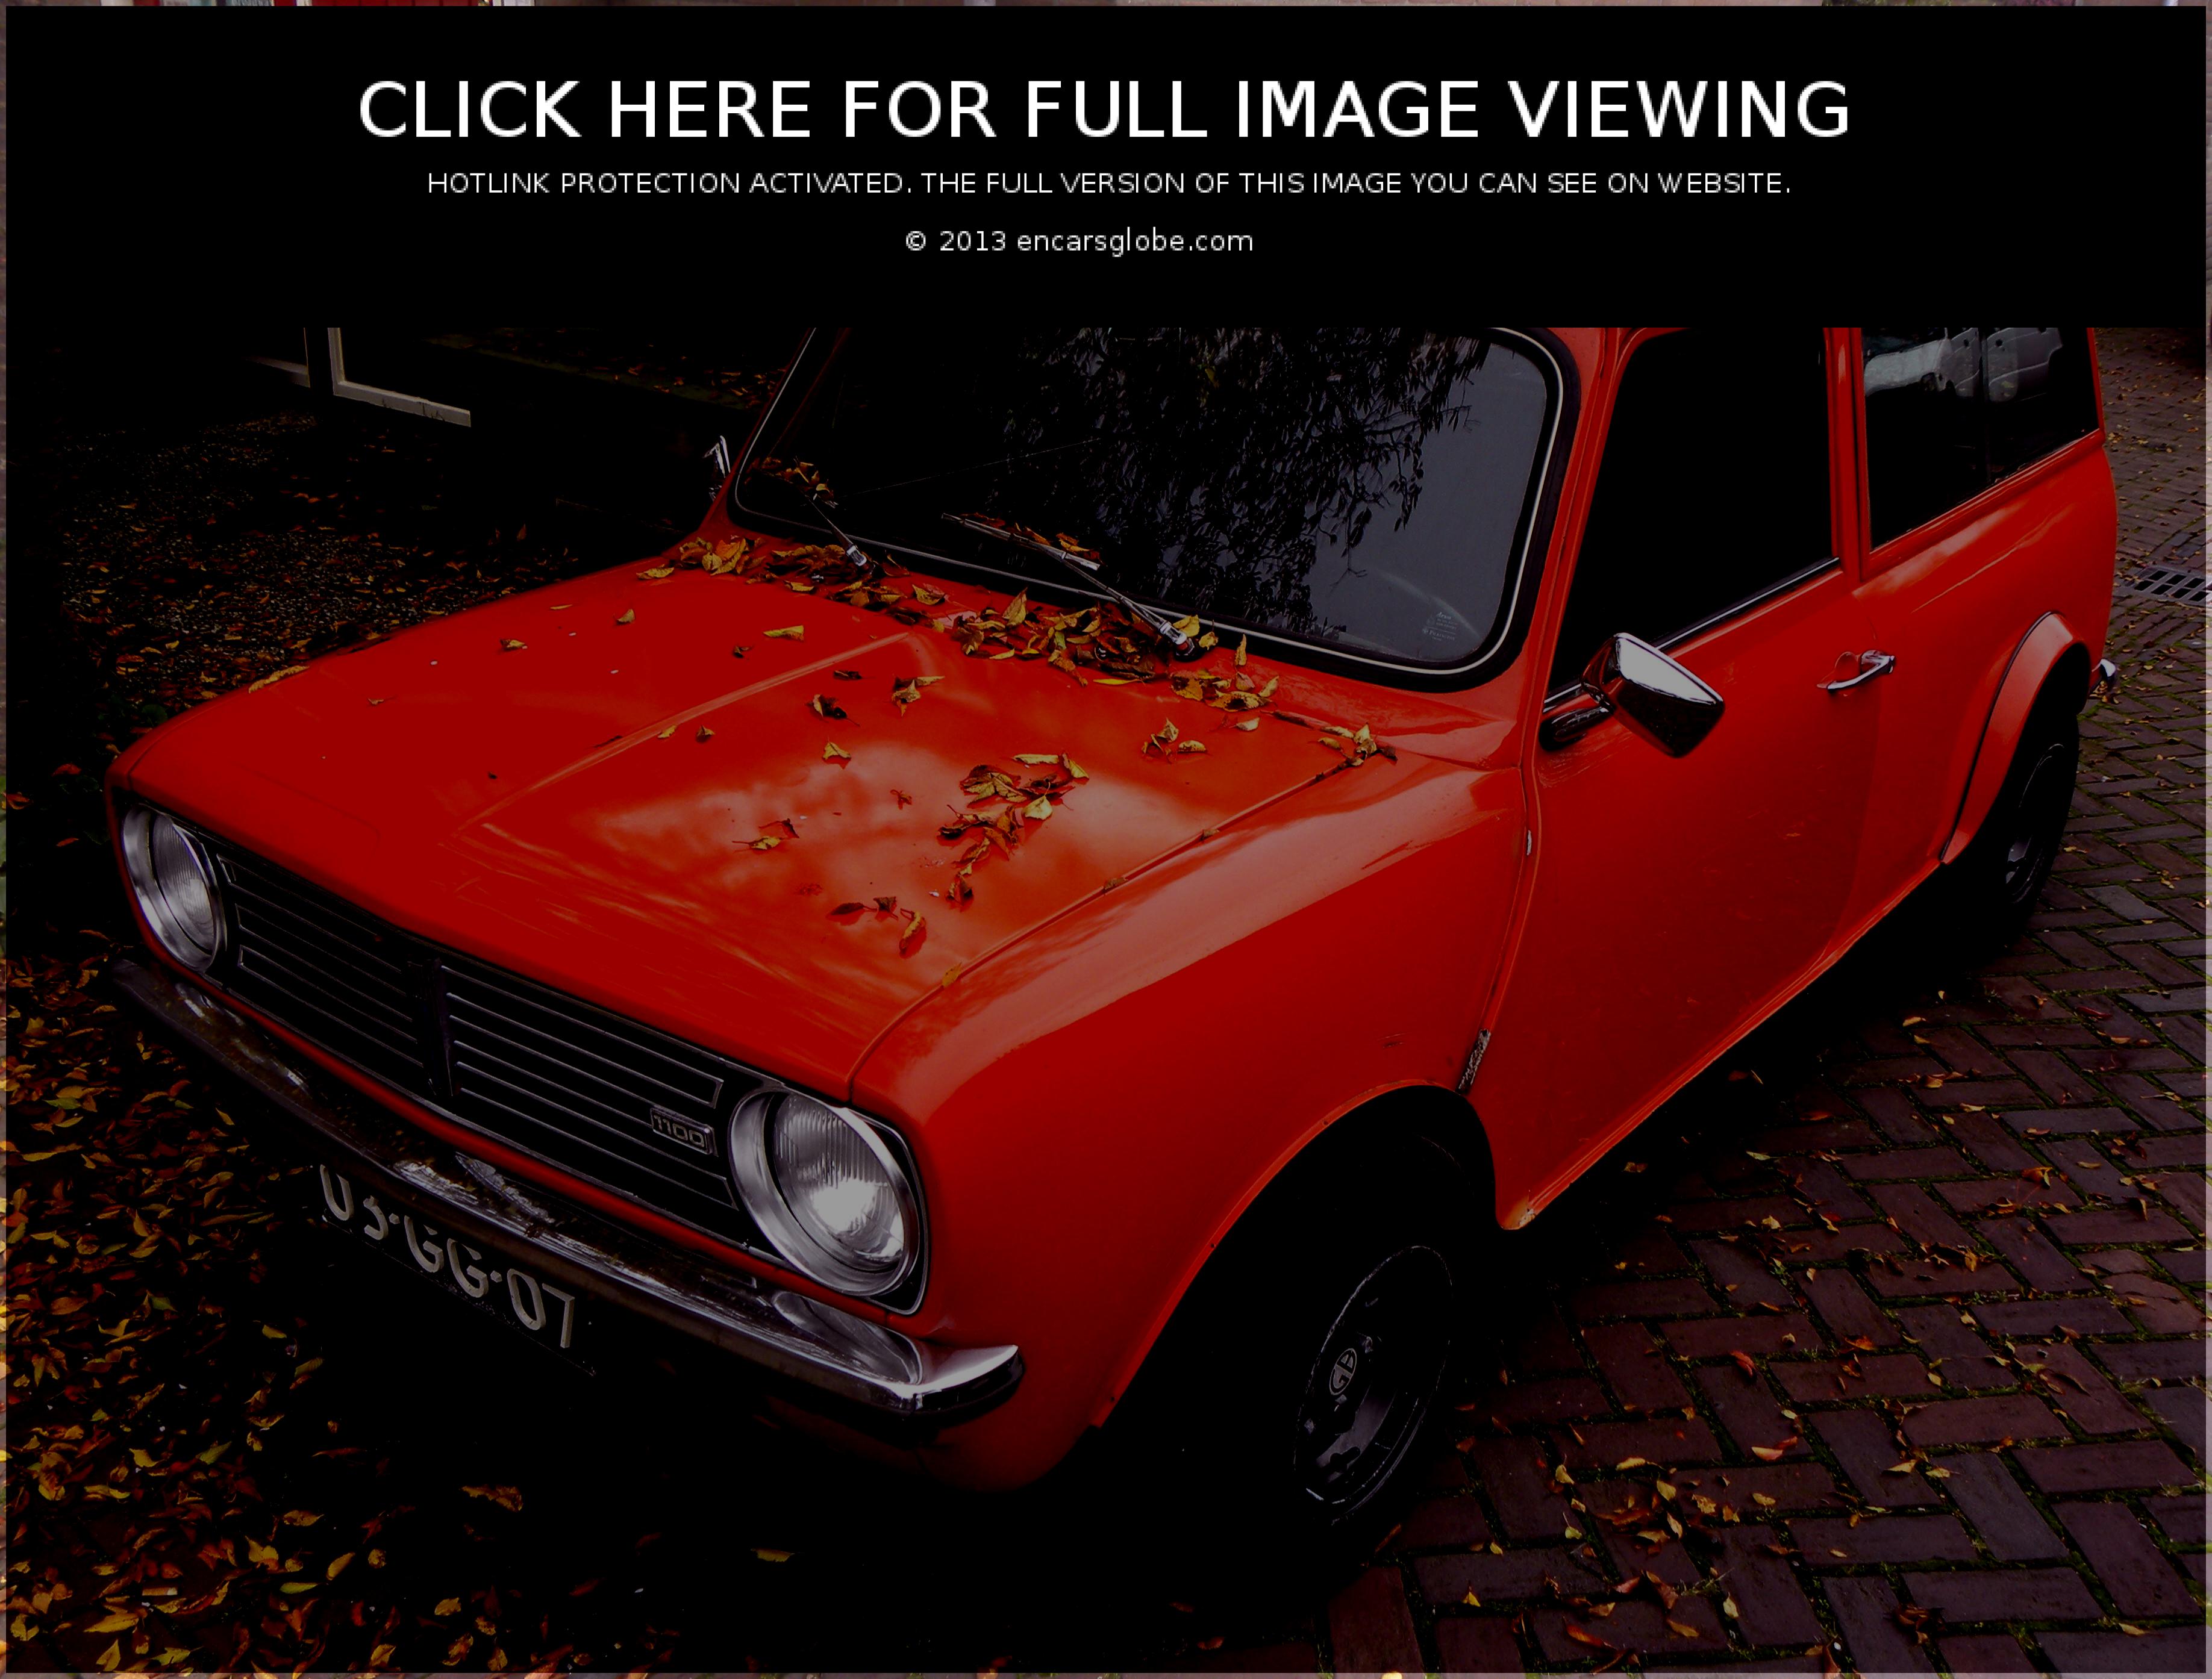 Mini Clubman Estate 1100 Photo Gallery: Photo #07 out of 10, Image ...